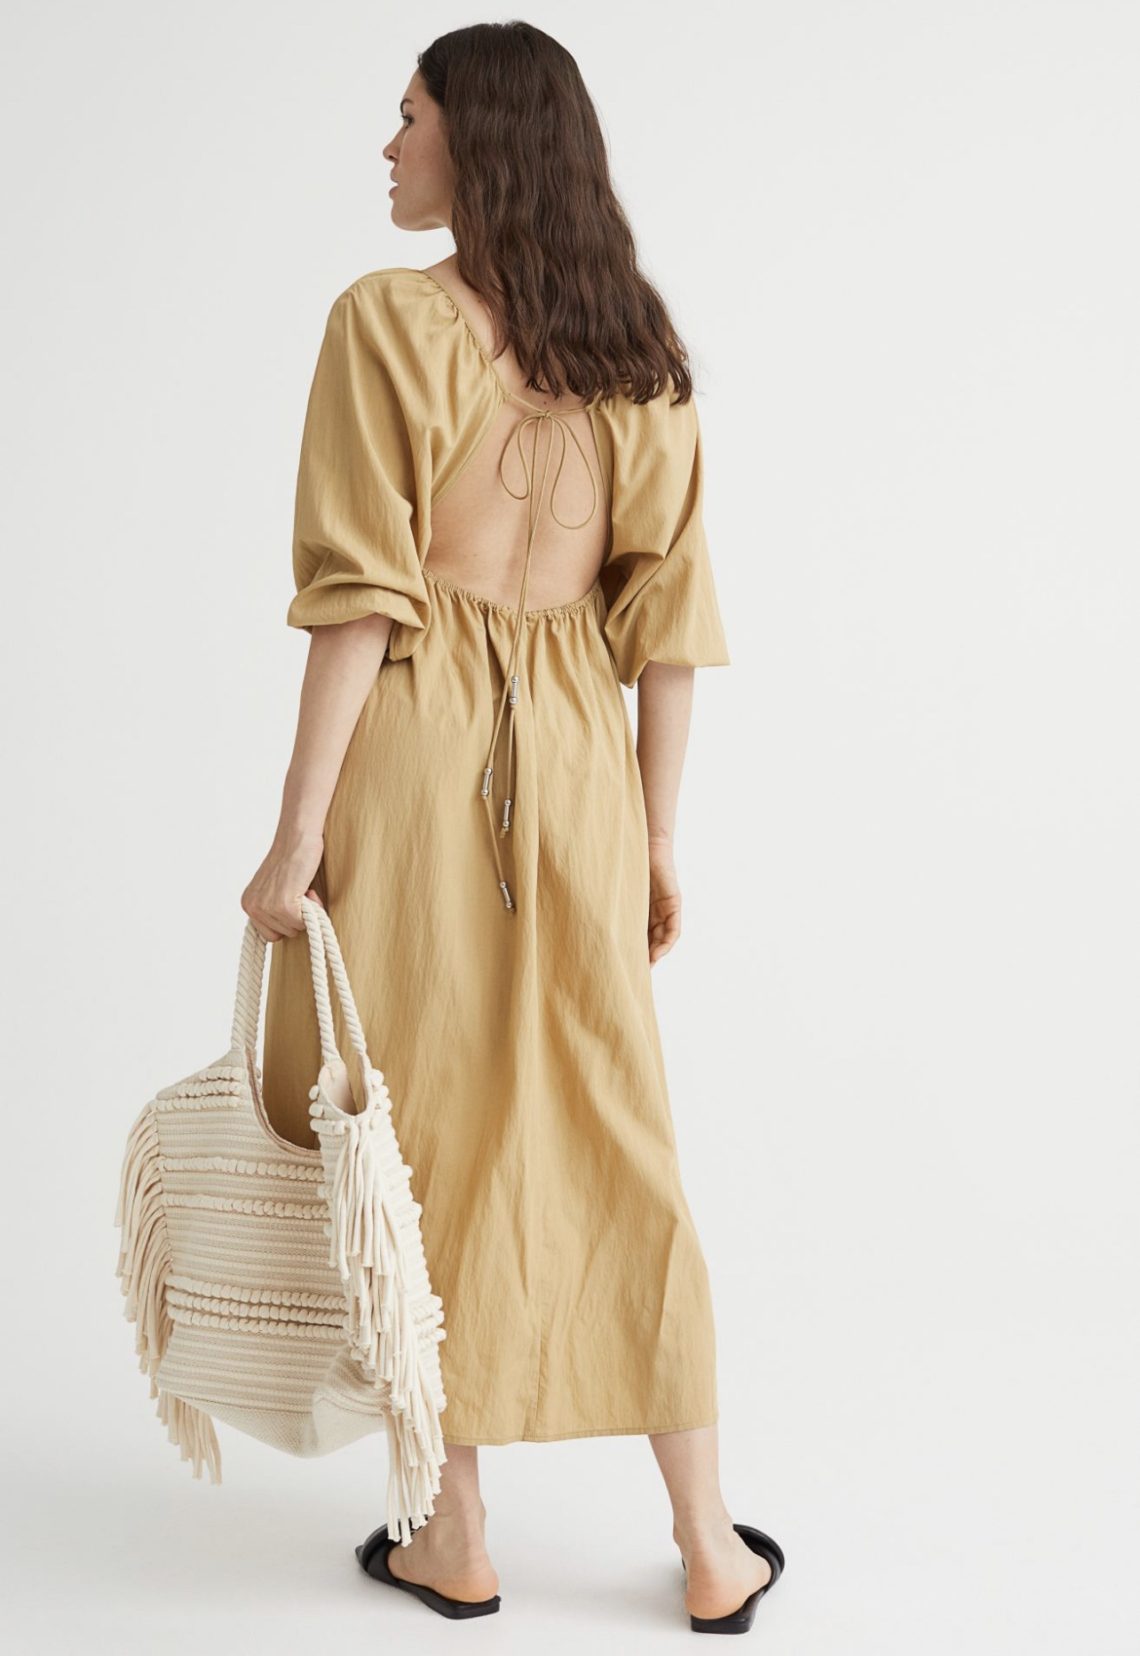 alt="12 New H&M Summer Dresses That Are Worth Checking"